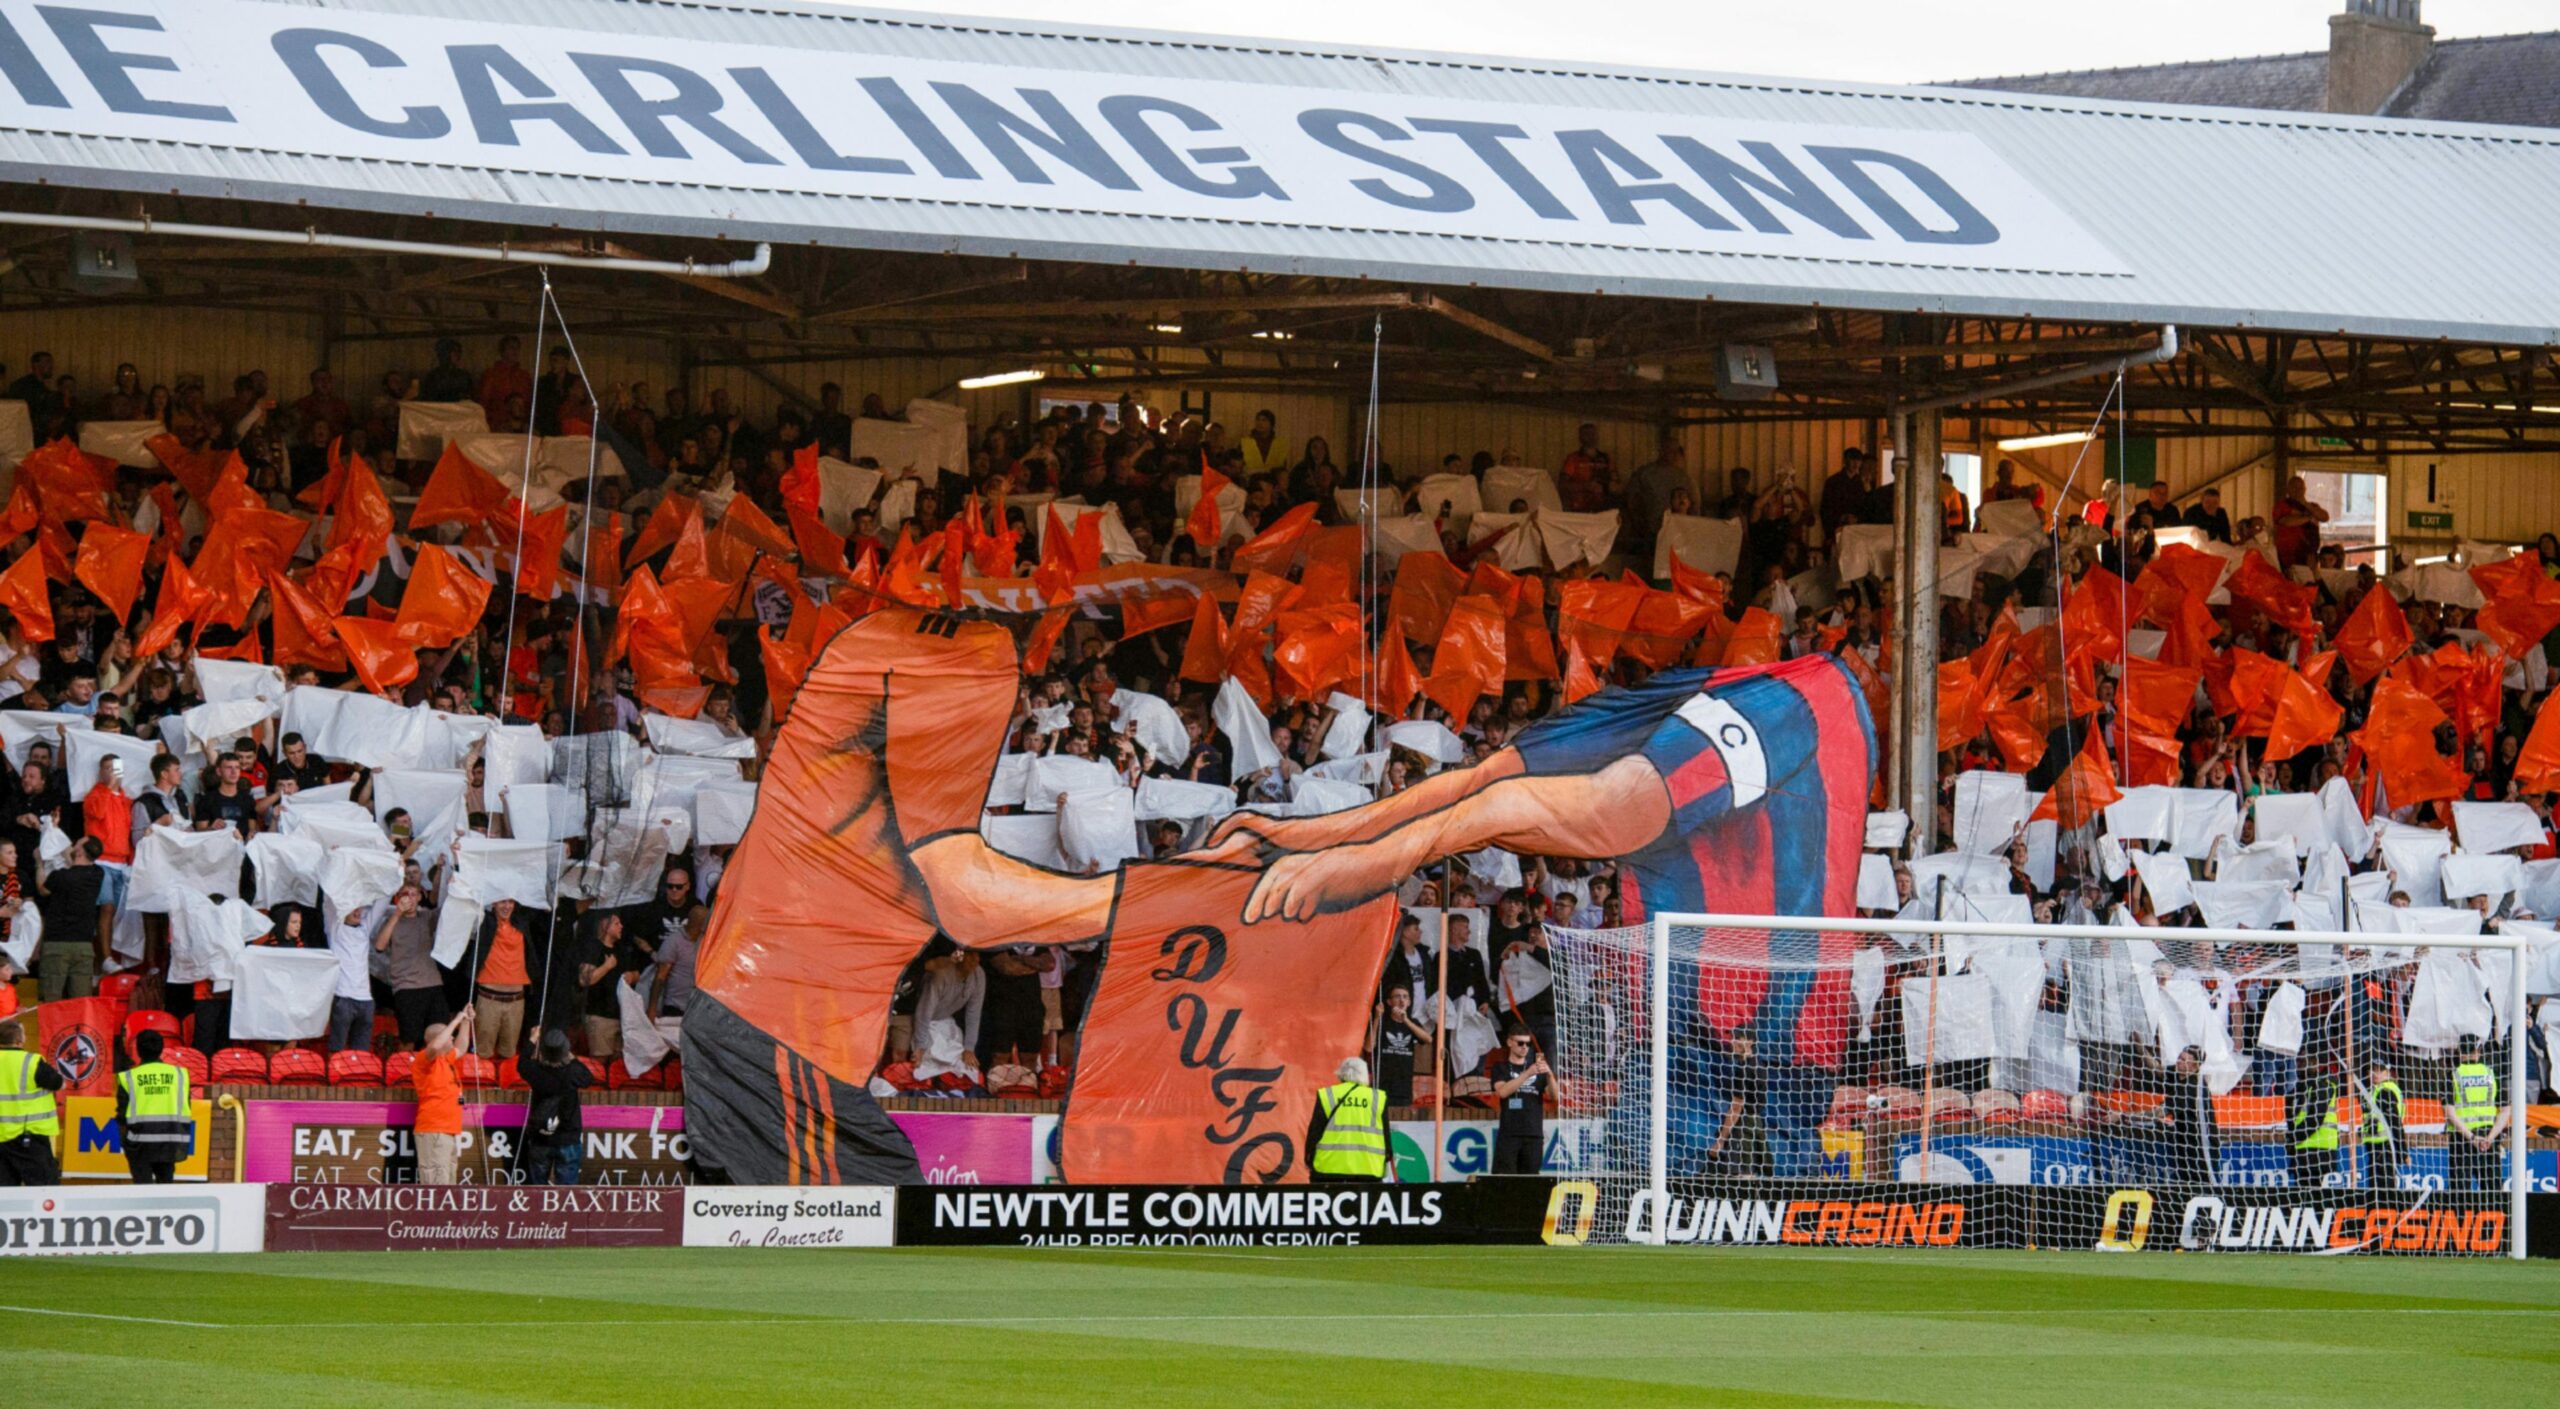 In the Shed End, fans displayed this tifo.